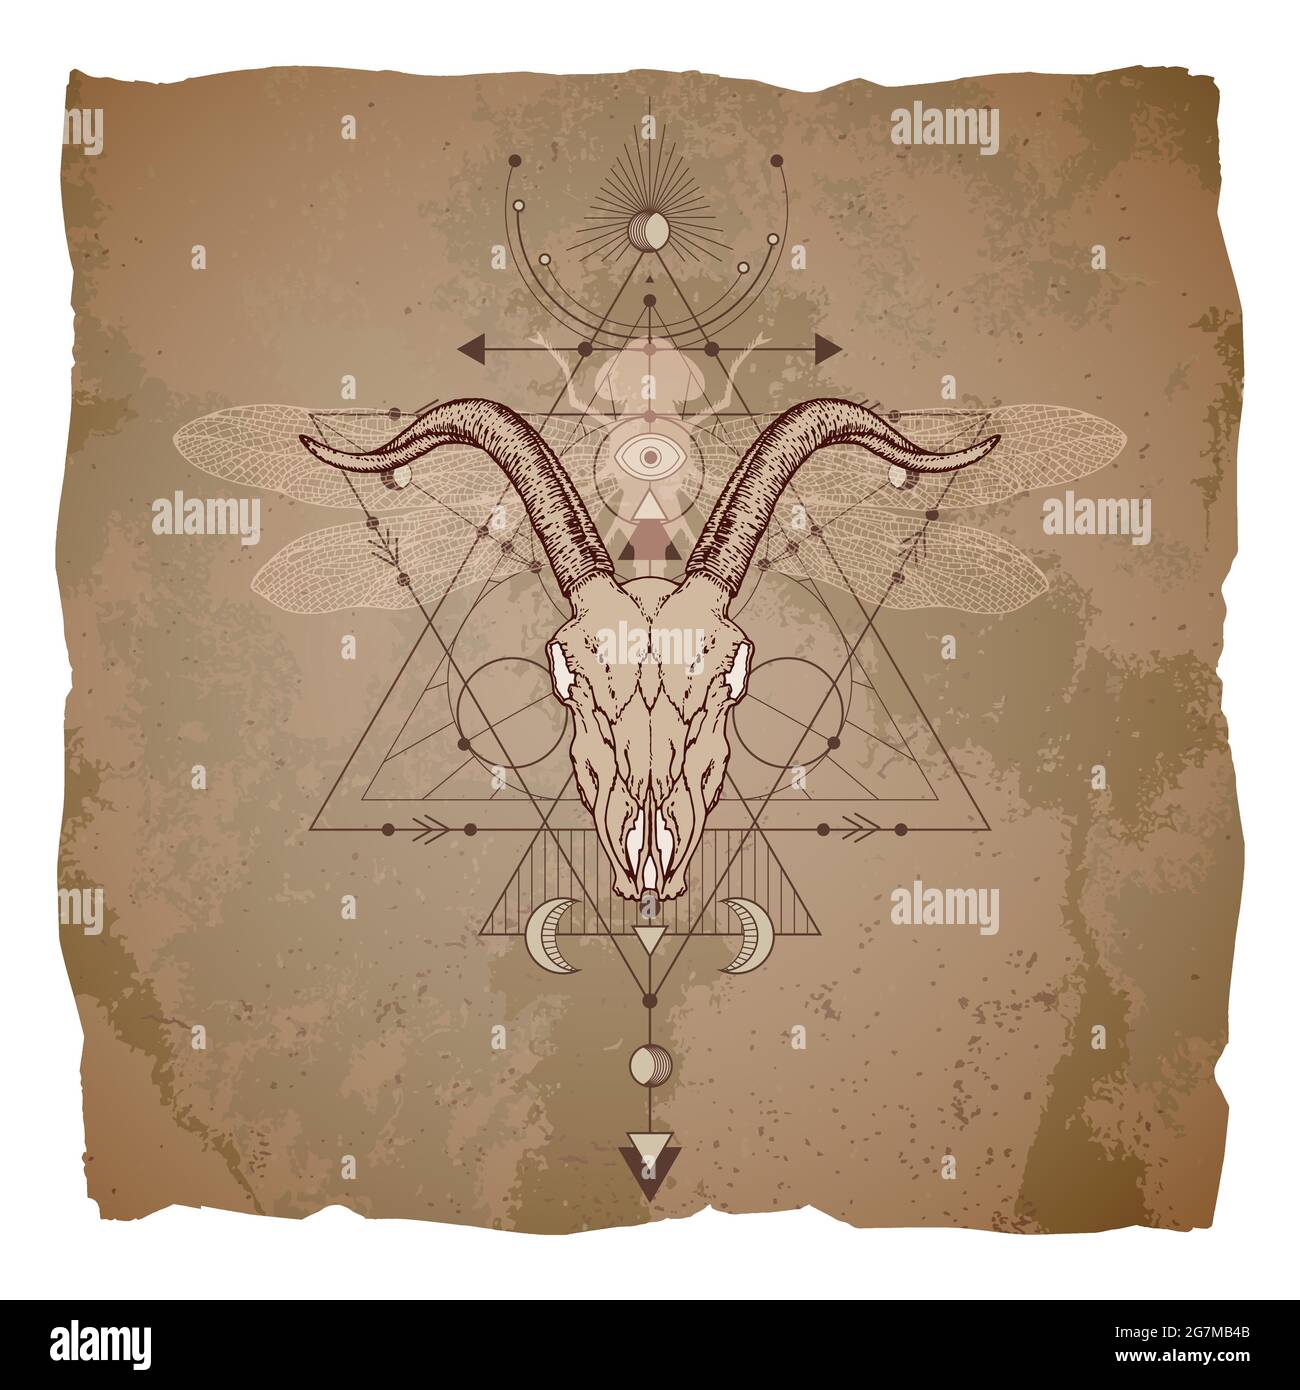 Vector illustration with hand drawn goat skull, dragonfly and Sacred geometric symbol on vintage paper background with torn edges. Abstract mystic sig Stock Vector